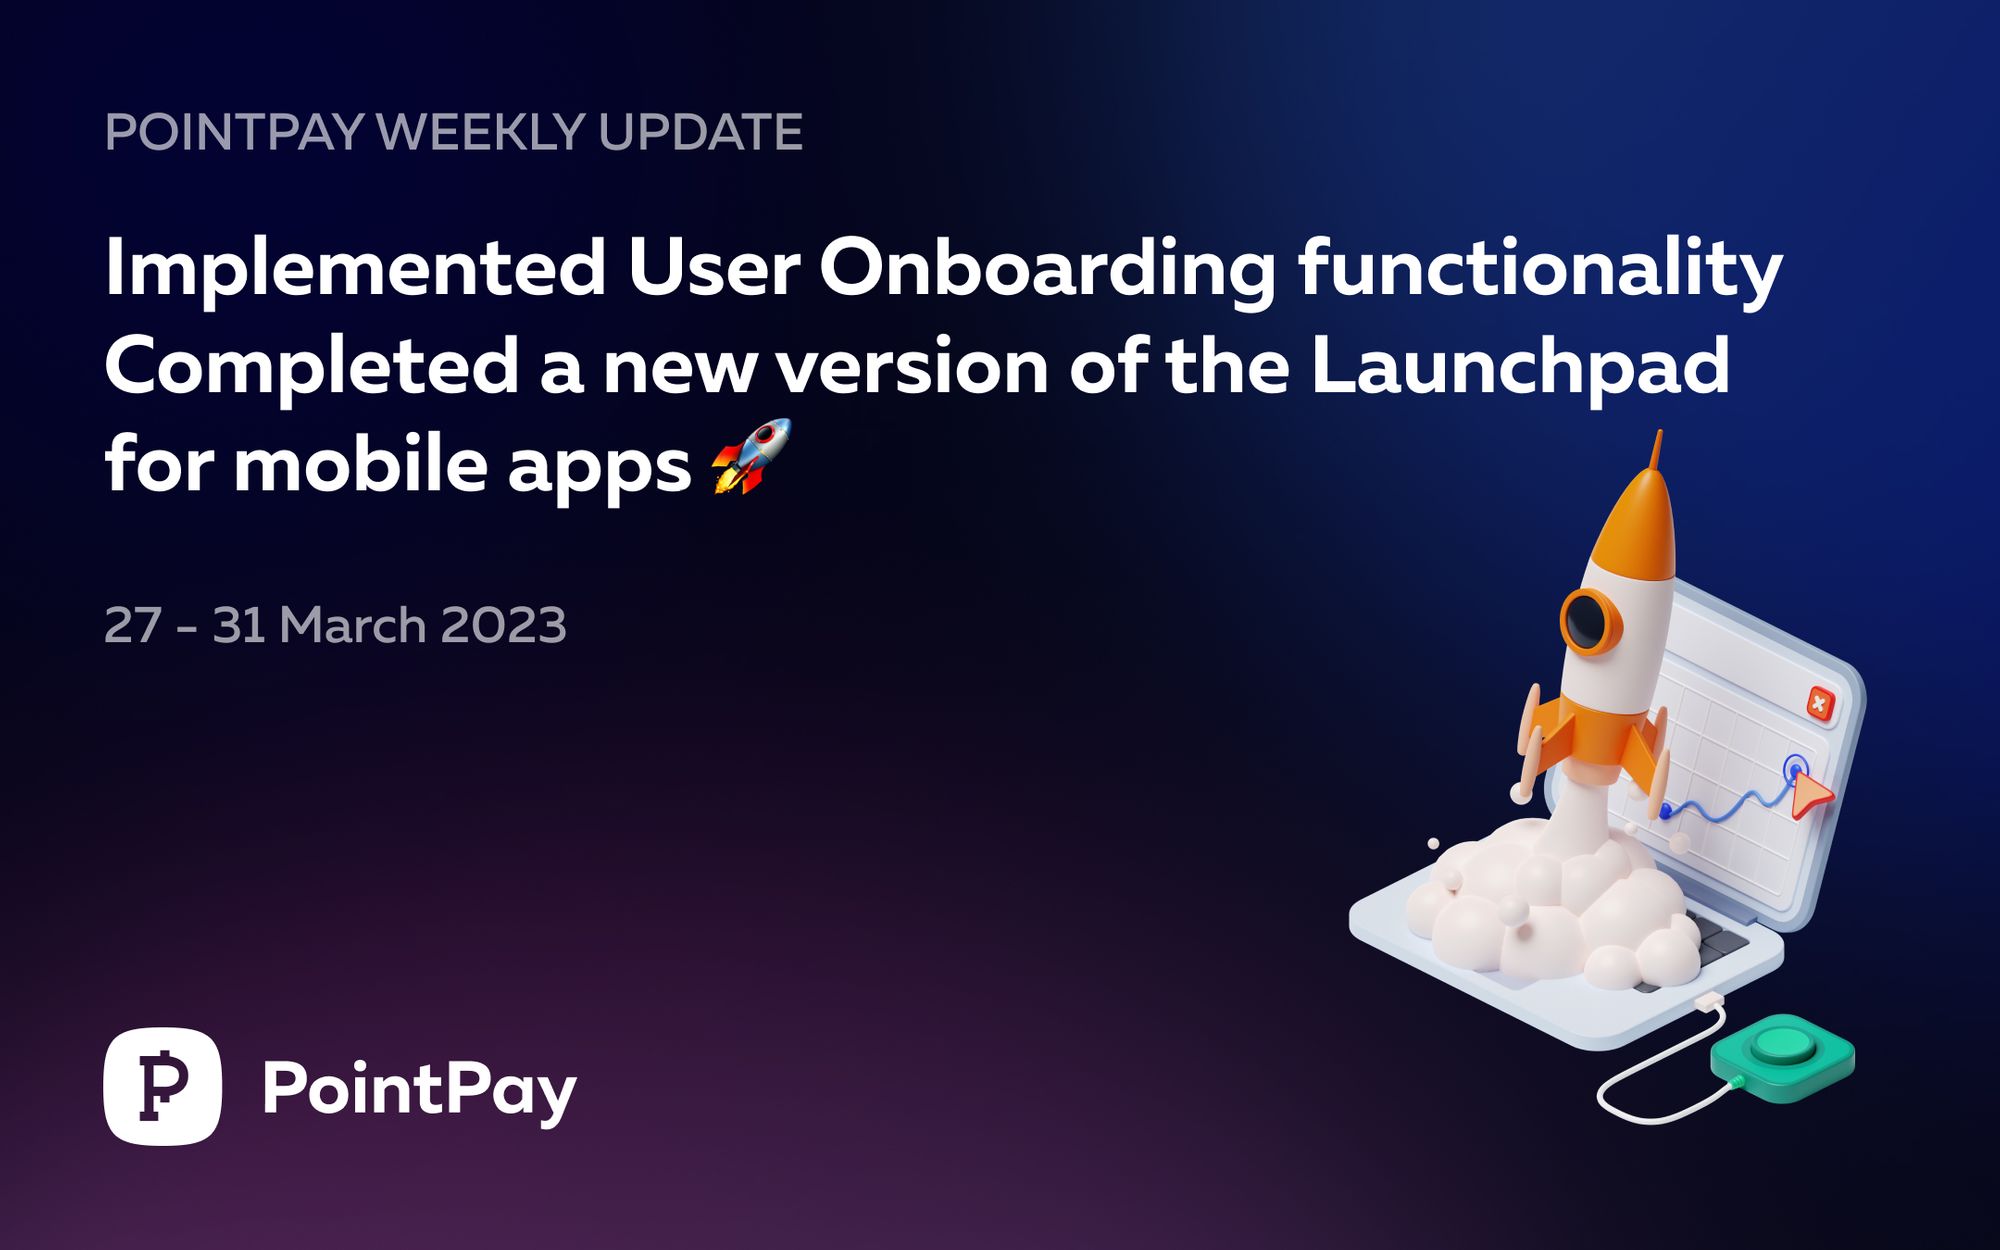 PointPay Weekly Update (27 - 31 March 2023)